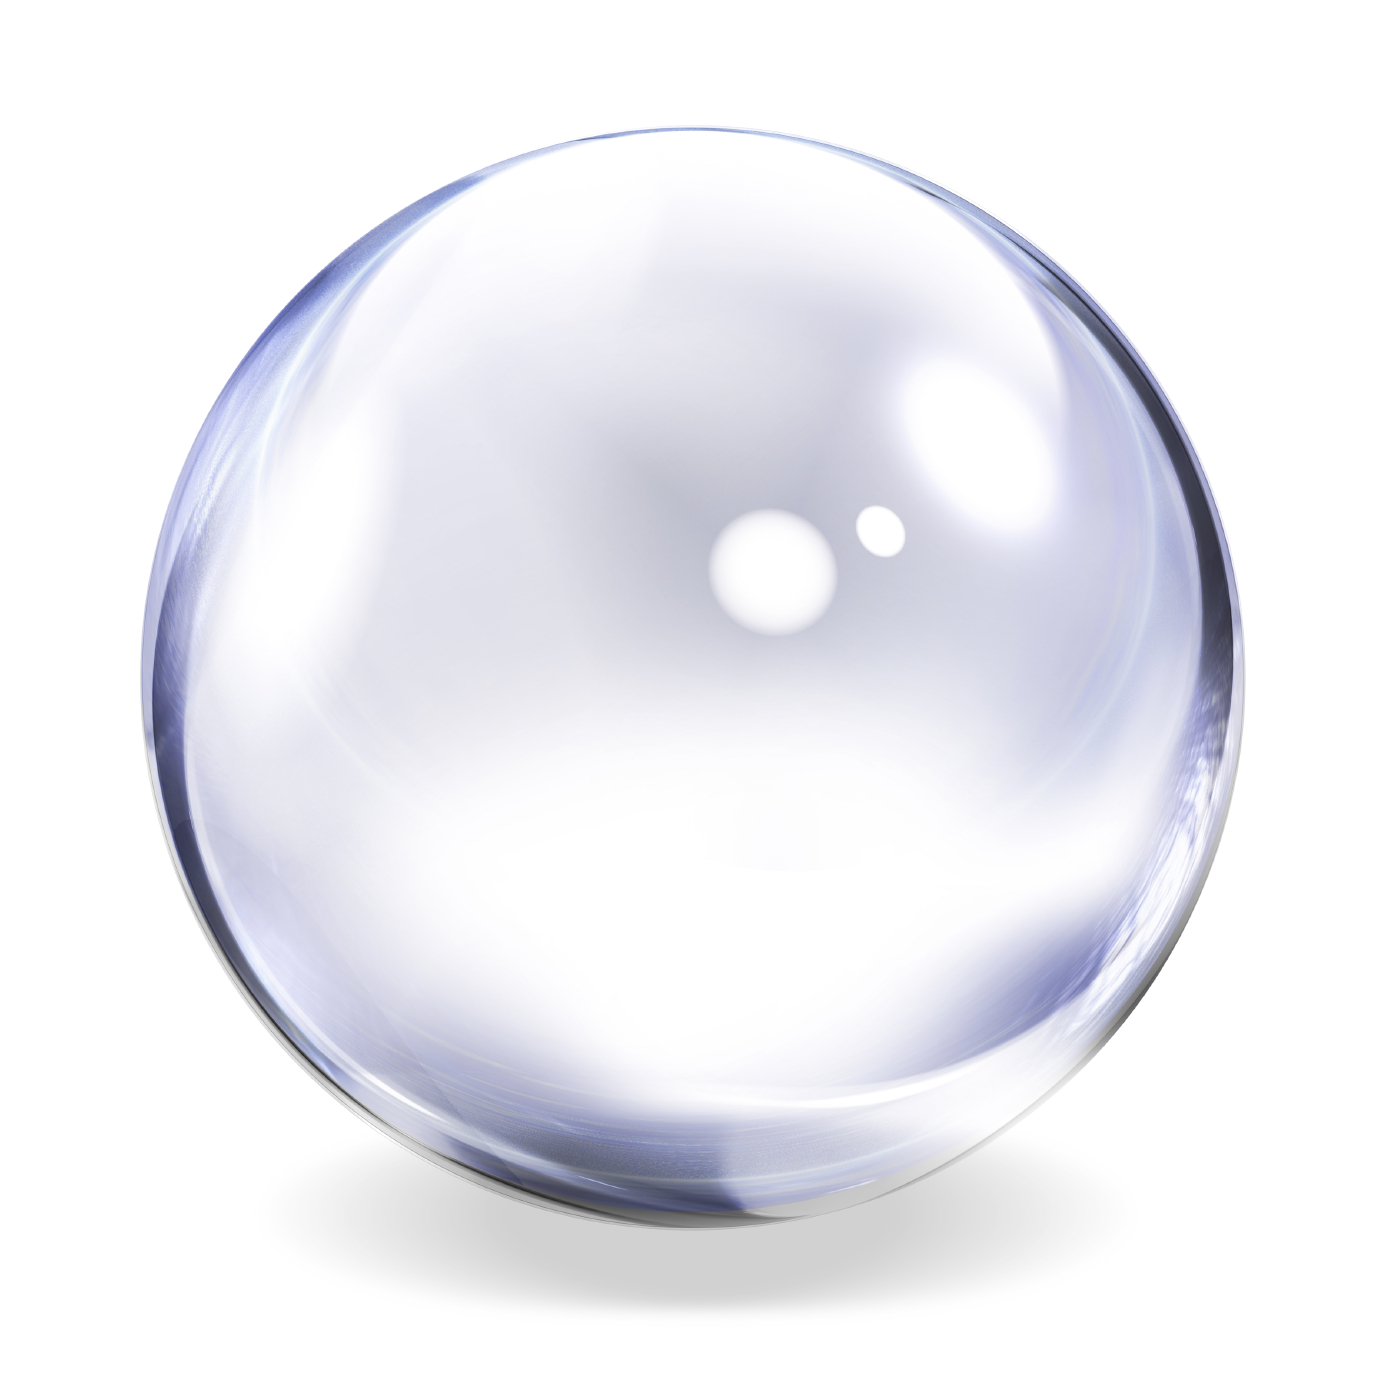 Images of Bubble | 1386x1385